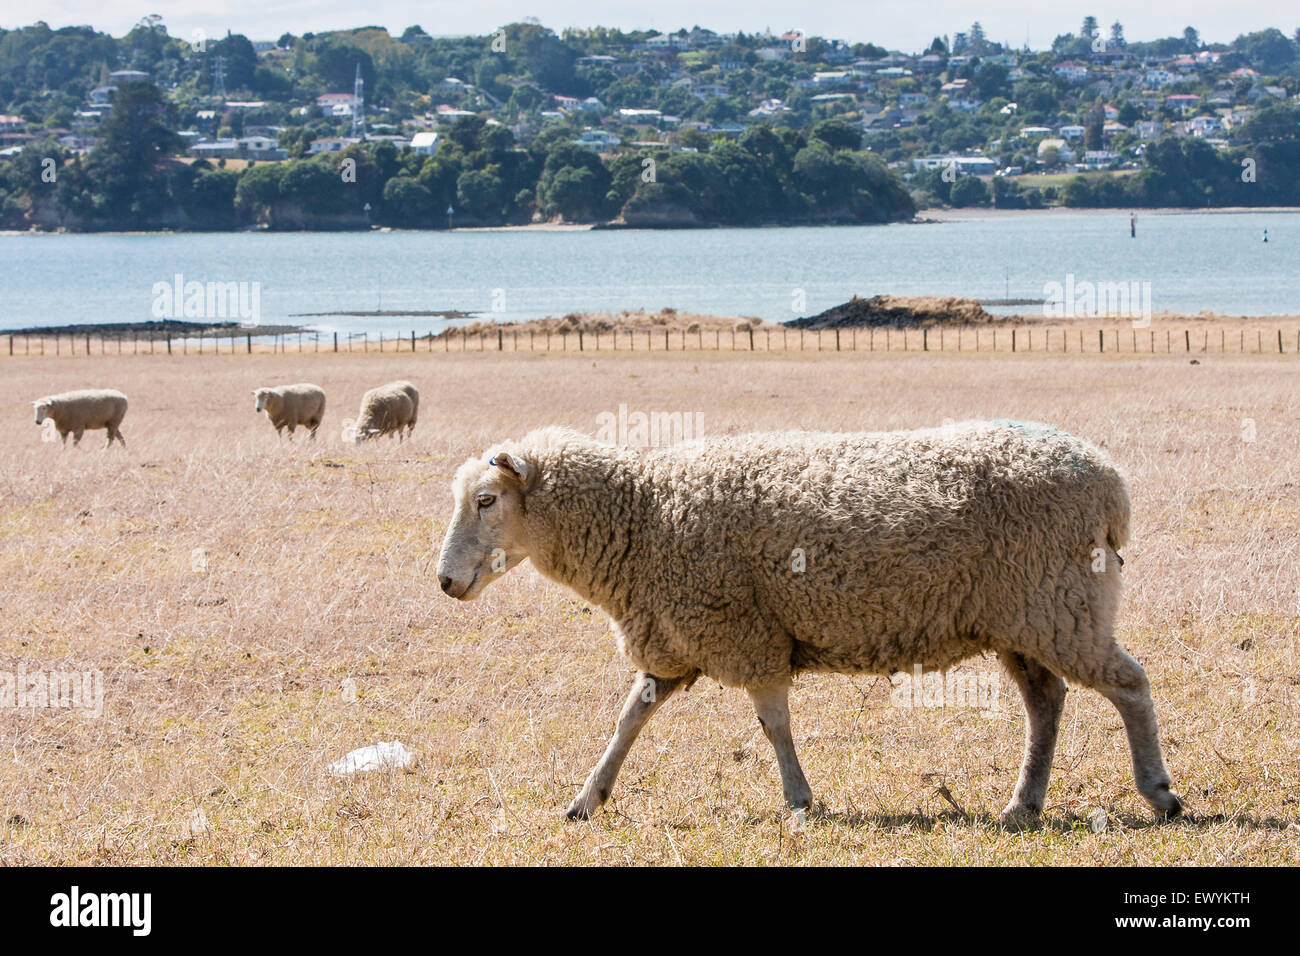 Sheep and Auckland City, suburbs in background,New Zealand. Photo taken near One Tree Hill and hiking trails in this area. Stock Photo